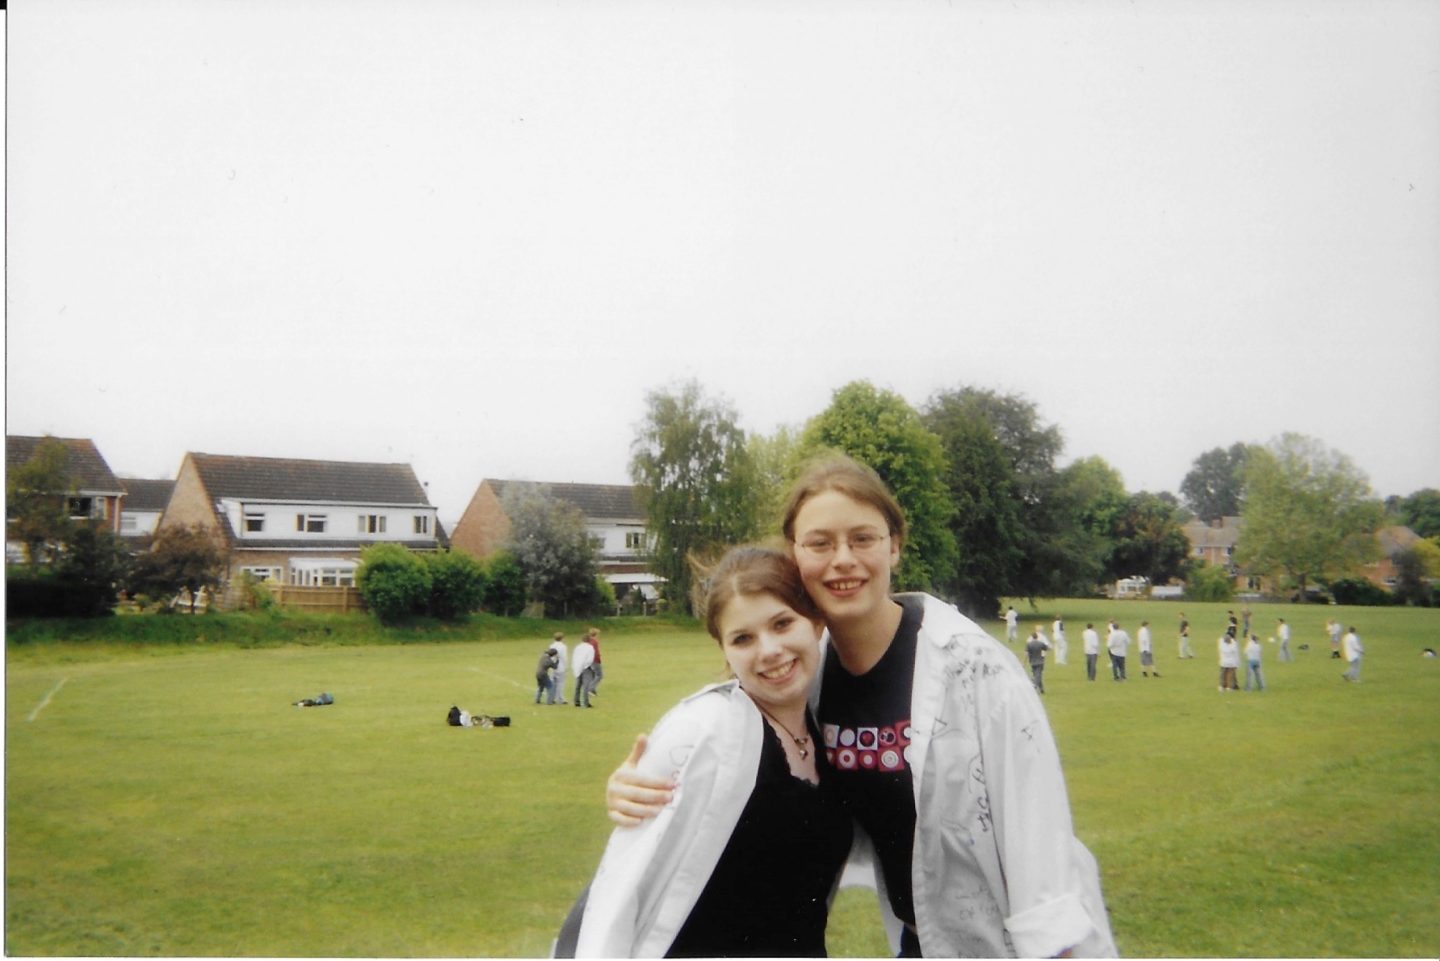 A photo of Caz and Abi hugging on the playing field for the last day of High School, while wearing their signed school shirts.